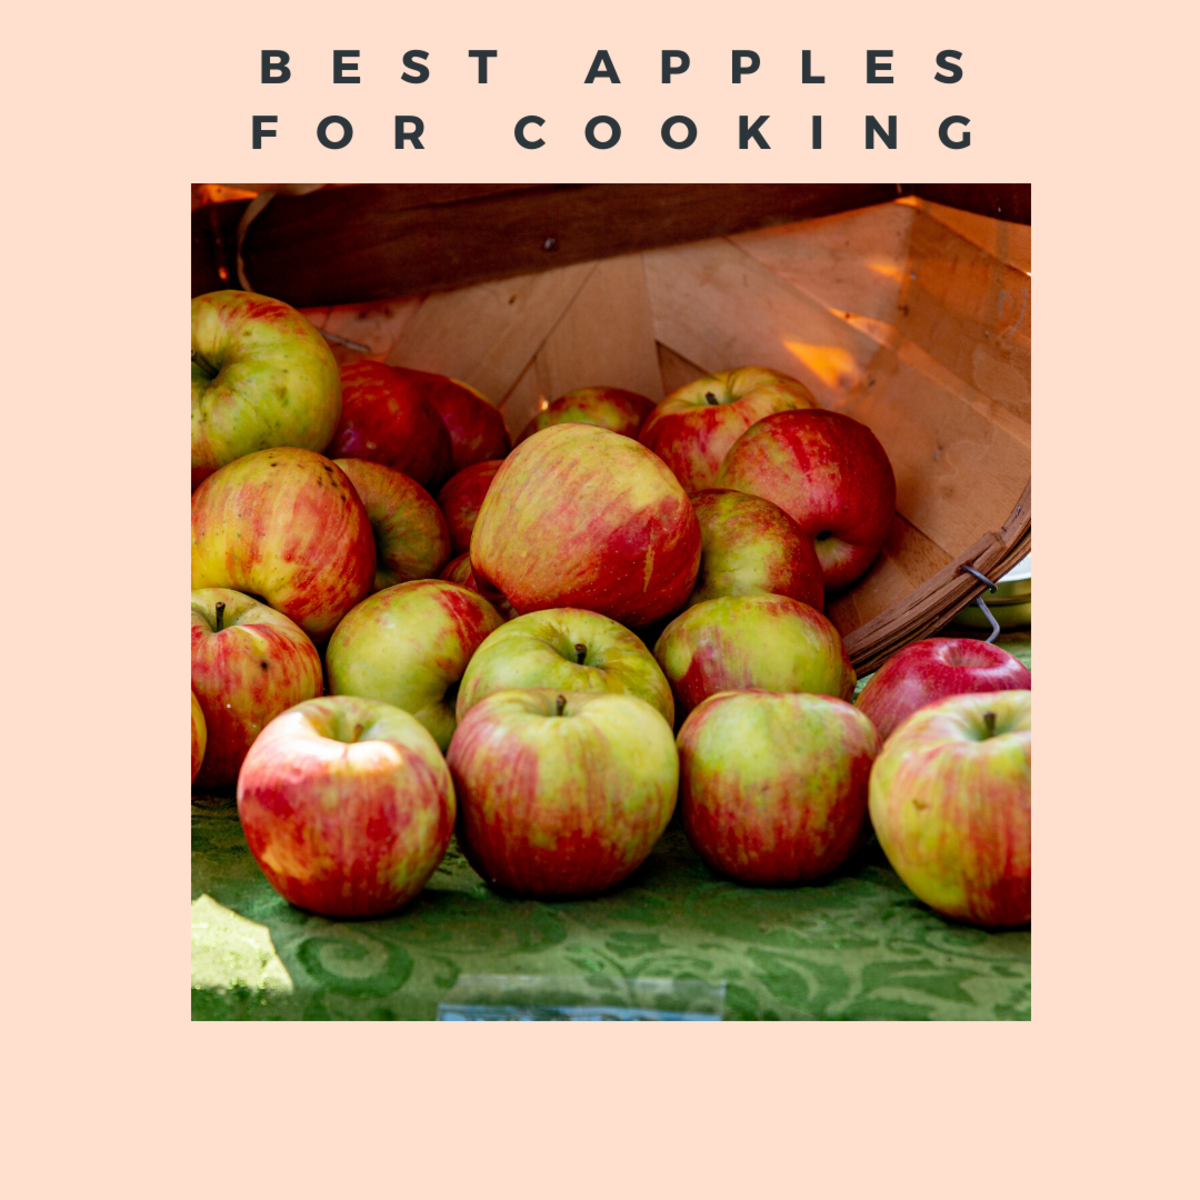 These apples go great with so many meals.